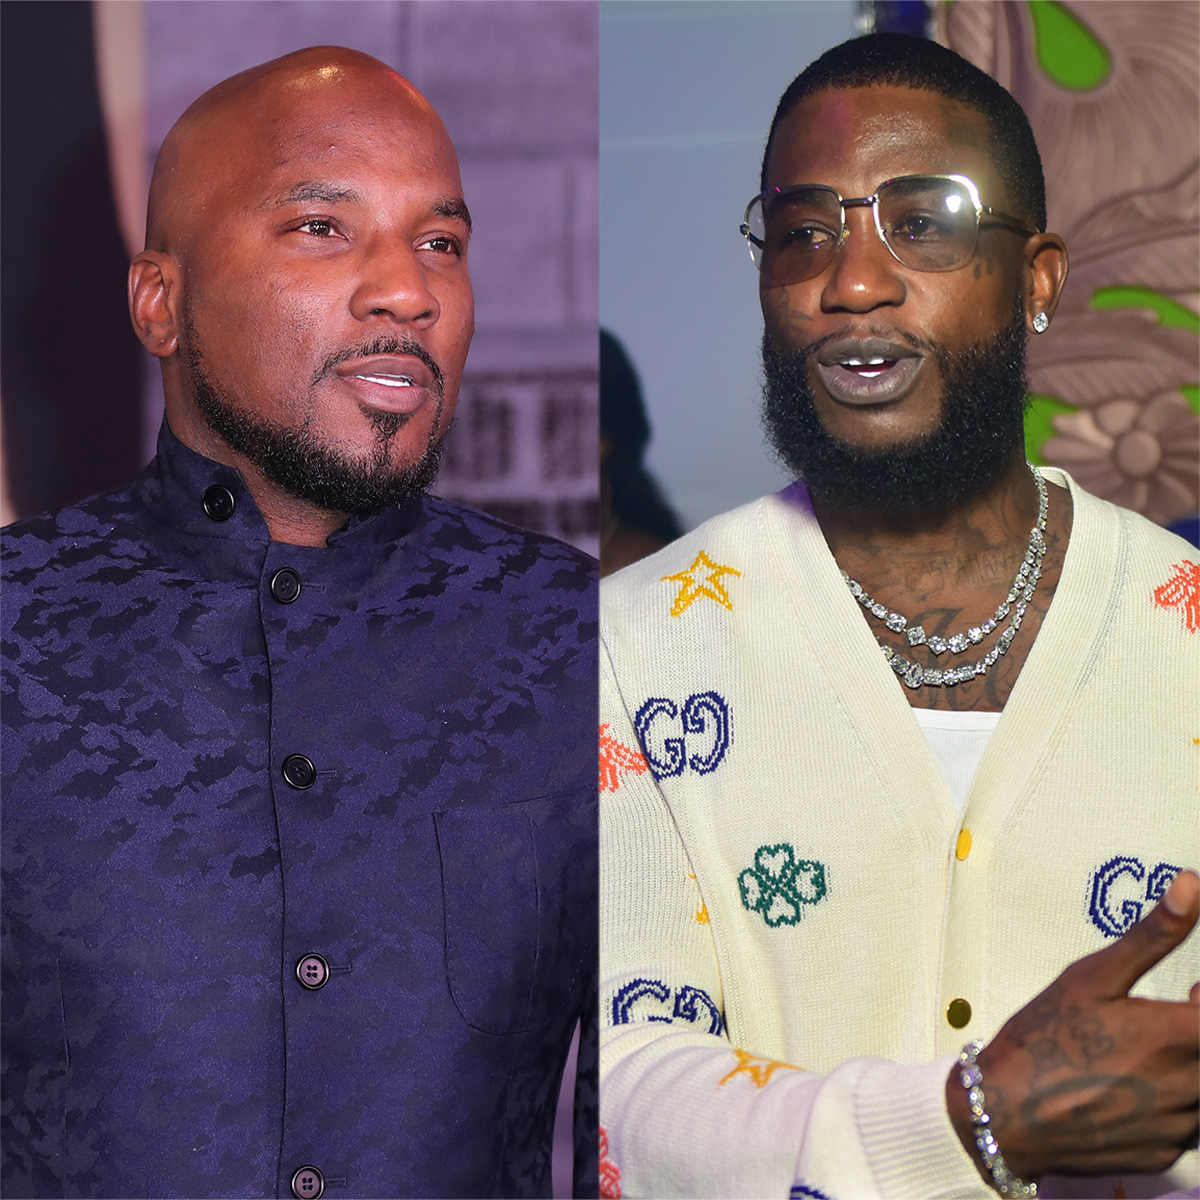 Jeezy And Gucci Mane May Have Ended Their Feud After Verzuz Battle E Online